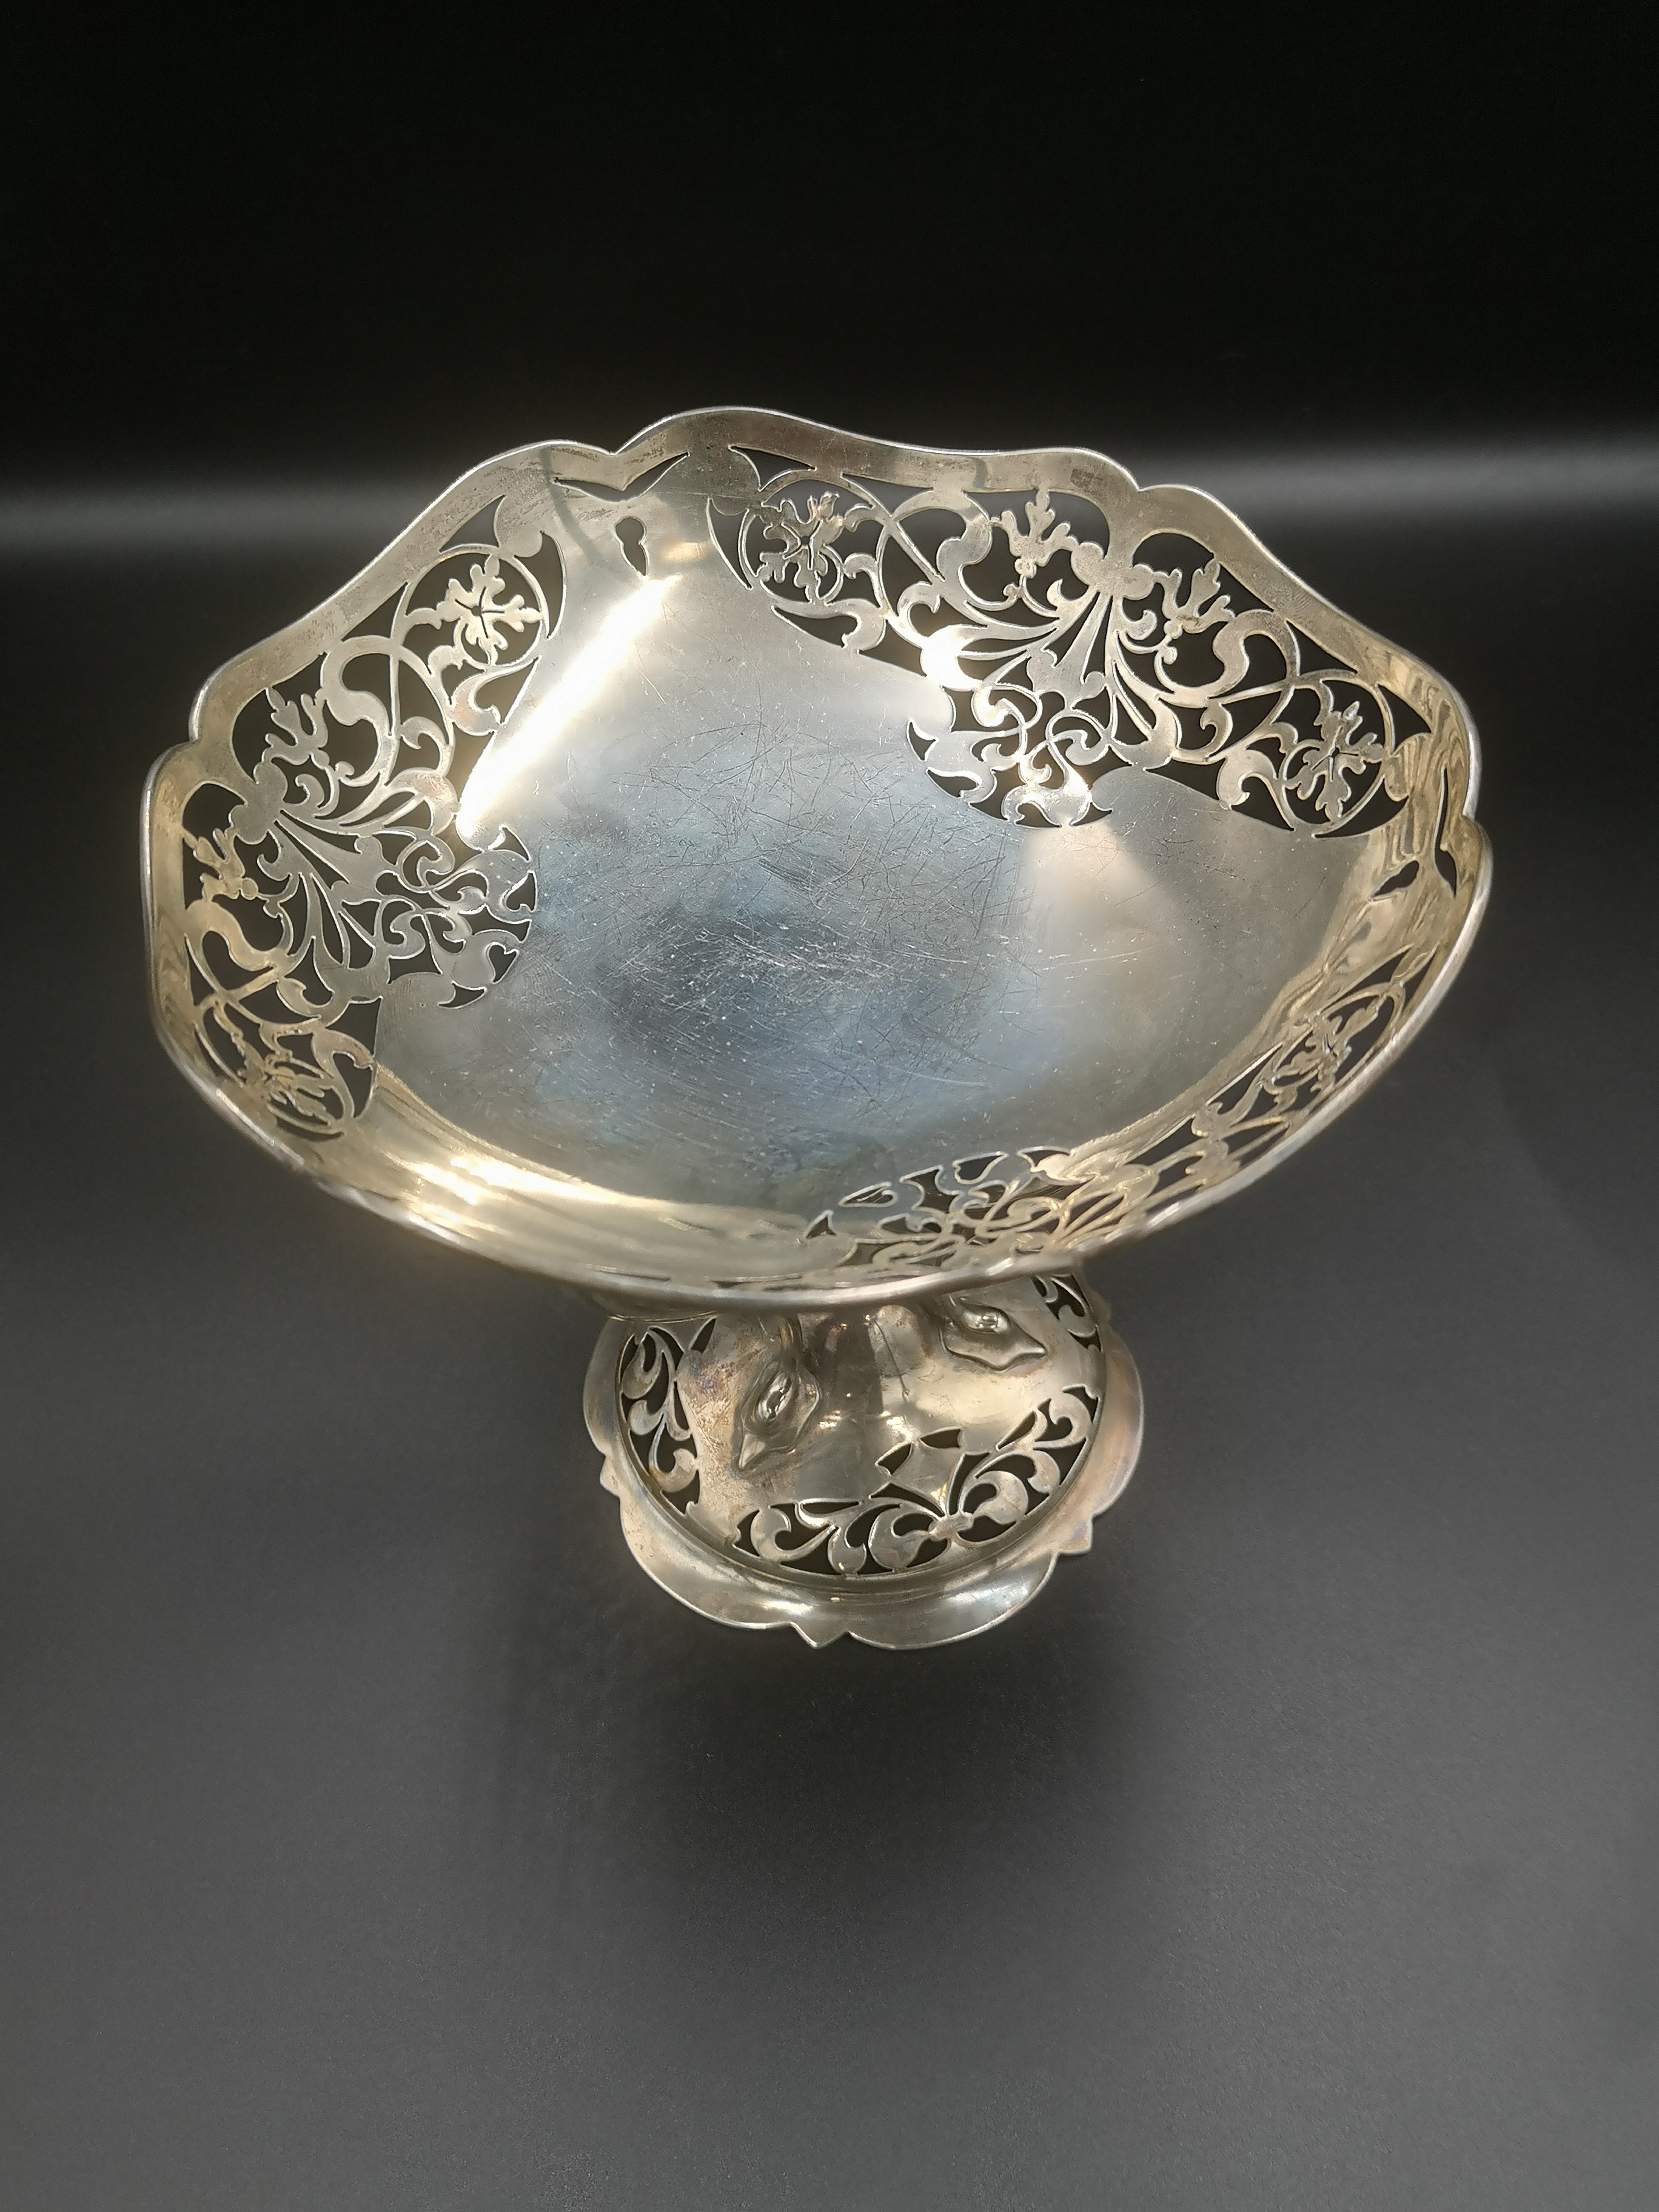 Pierced silver bowl - Image 2 of 5